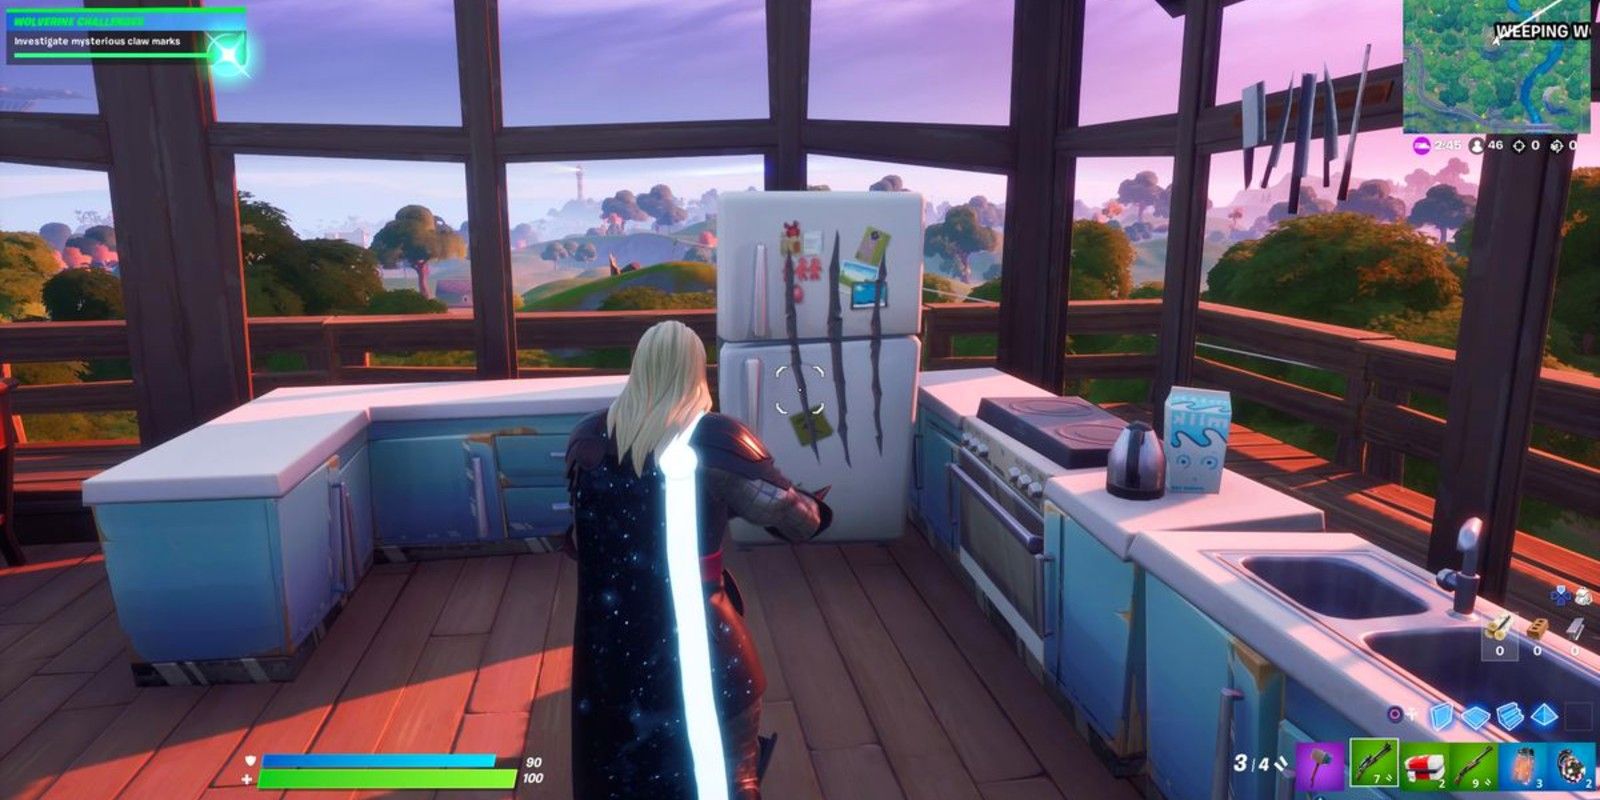 A player equipped with the new Thor skin finds a set of claw marks on the fridge at the top of the Ranger's Tower in Fortnite Season 4 as part of the Wolverine challenge